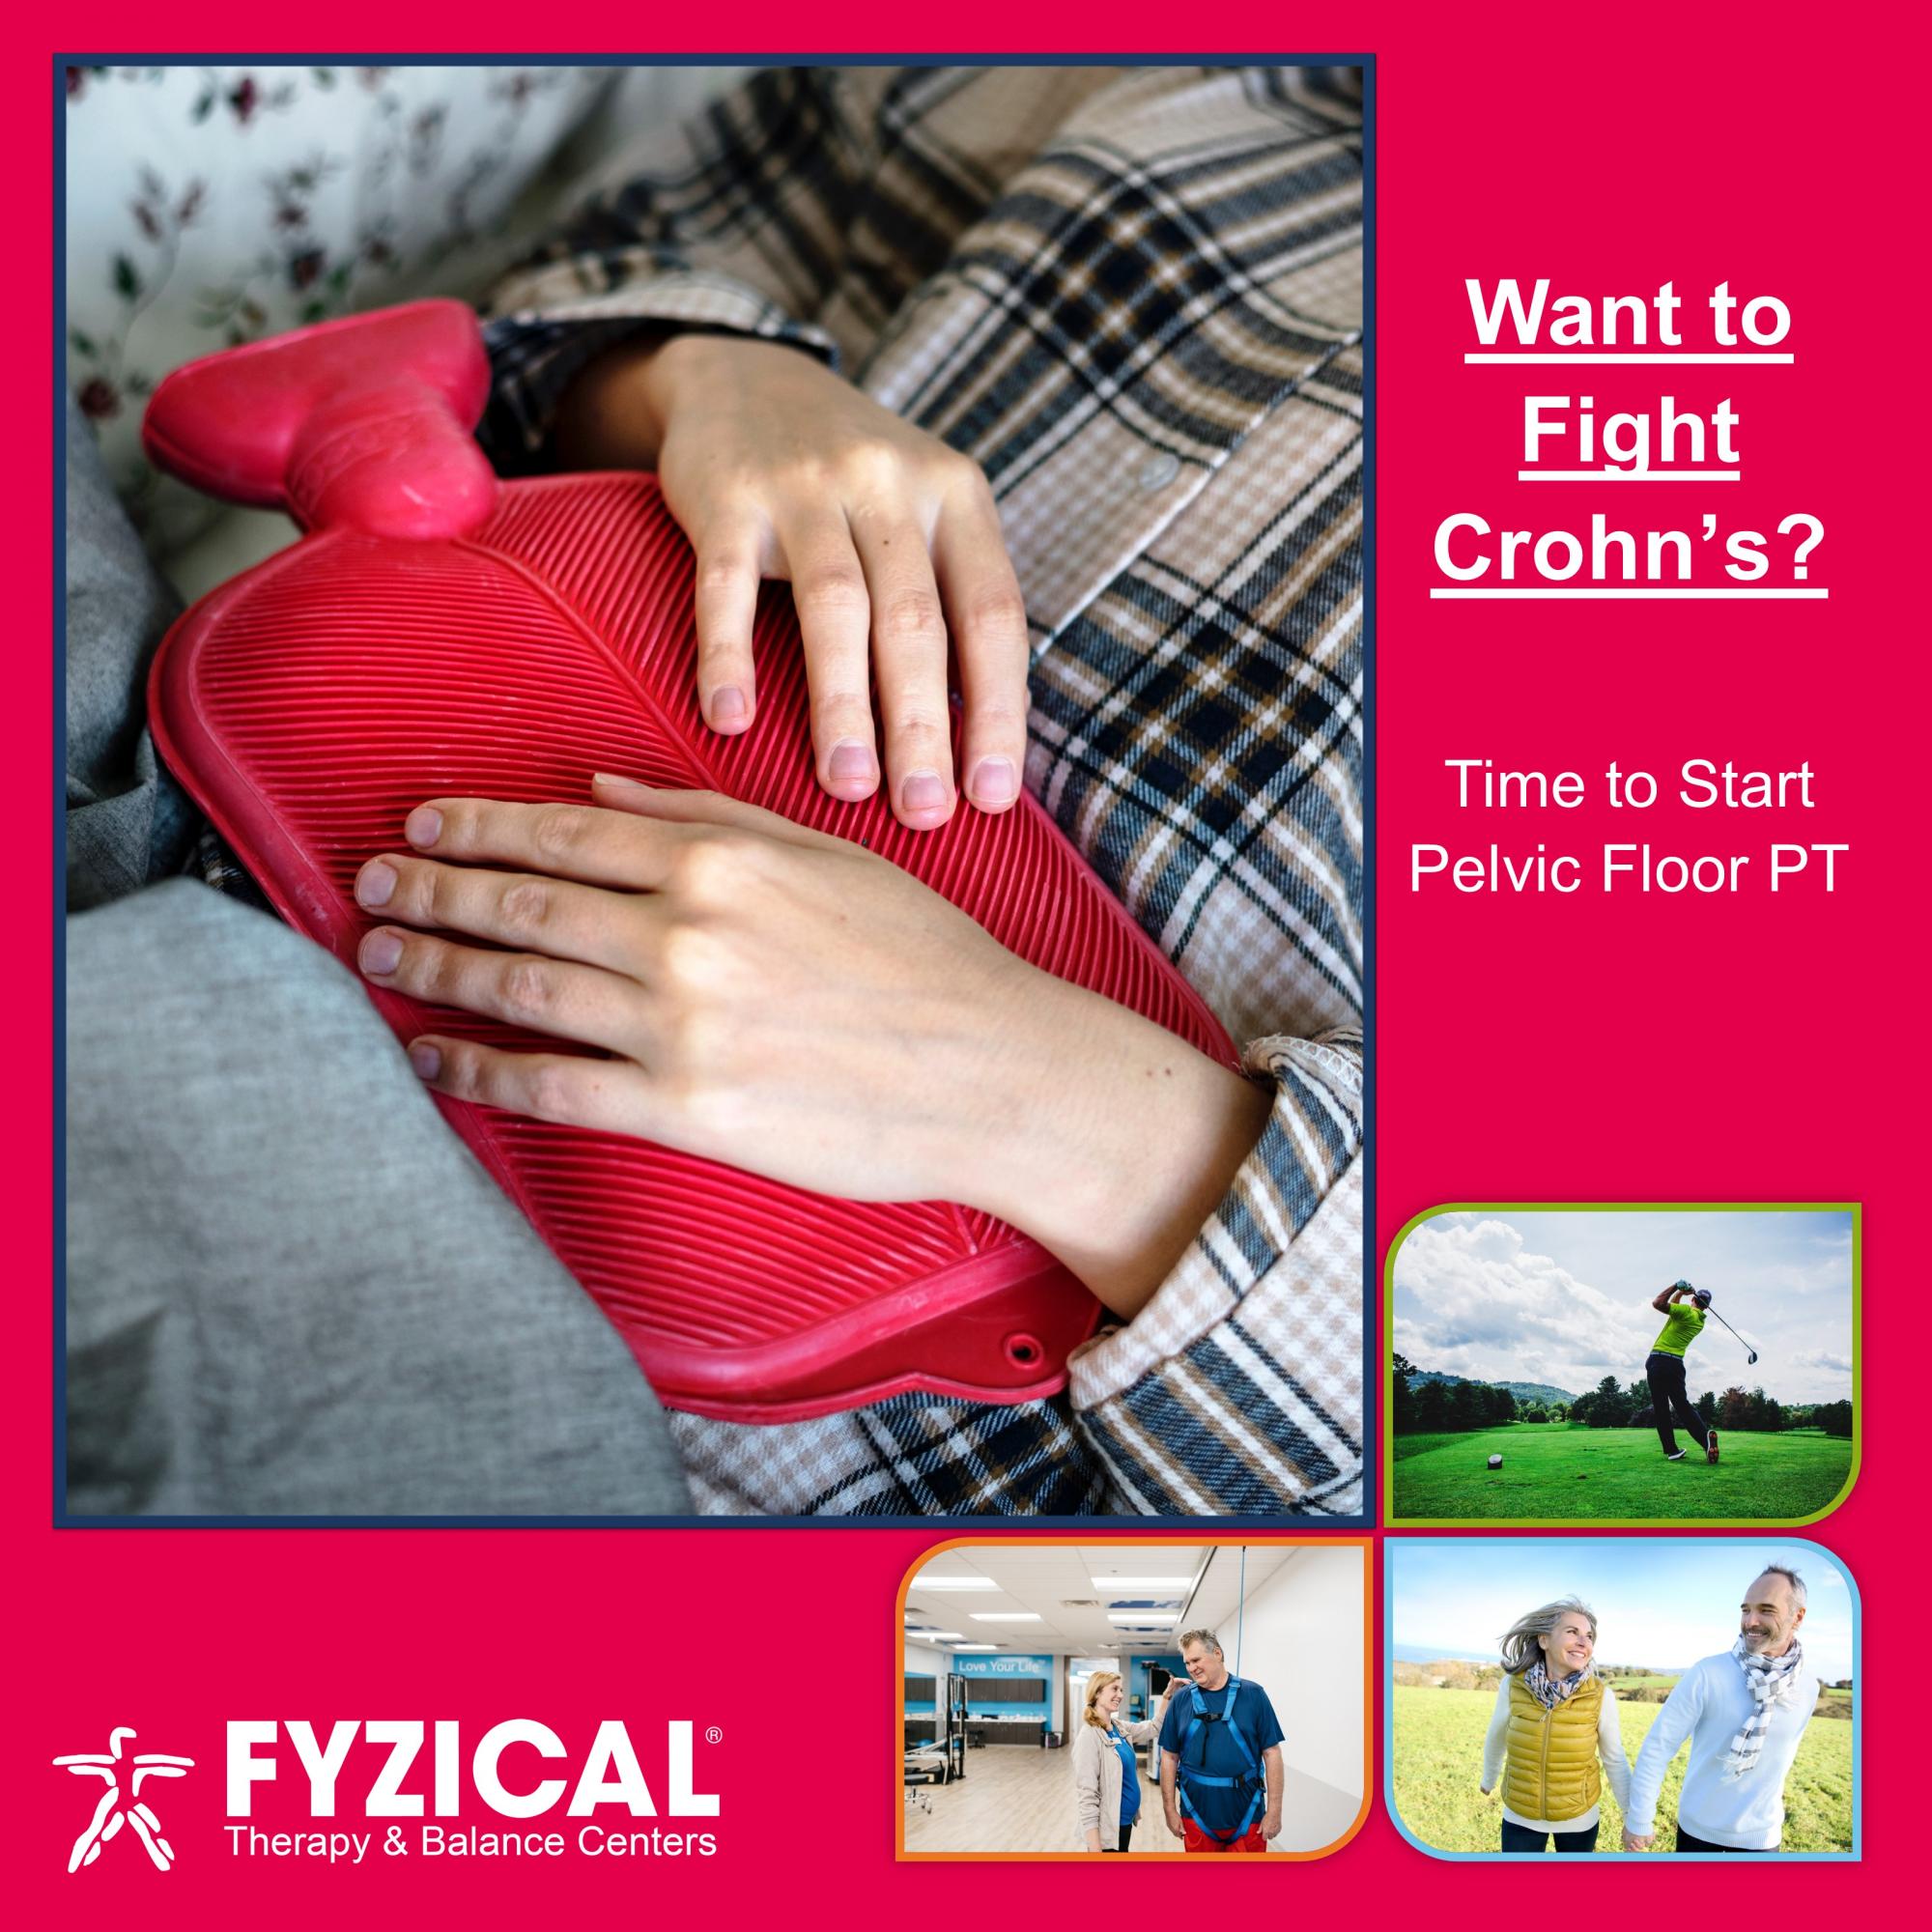 Crohn's, Colitis (UC), and IBD can be improved with pelvic health physical therapy from our physical therapists at FYZICAL in Oklahoma City (OKC).